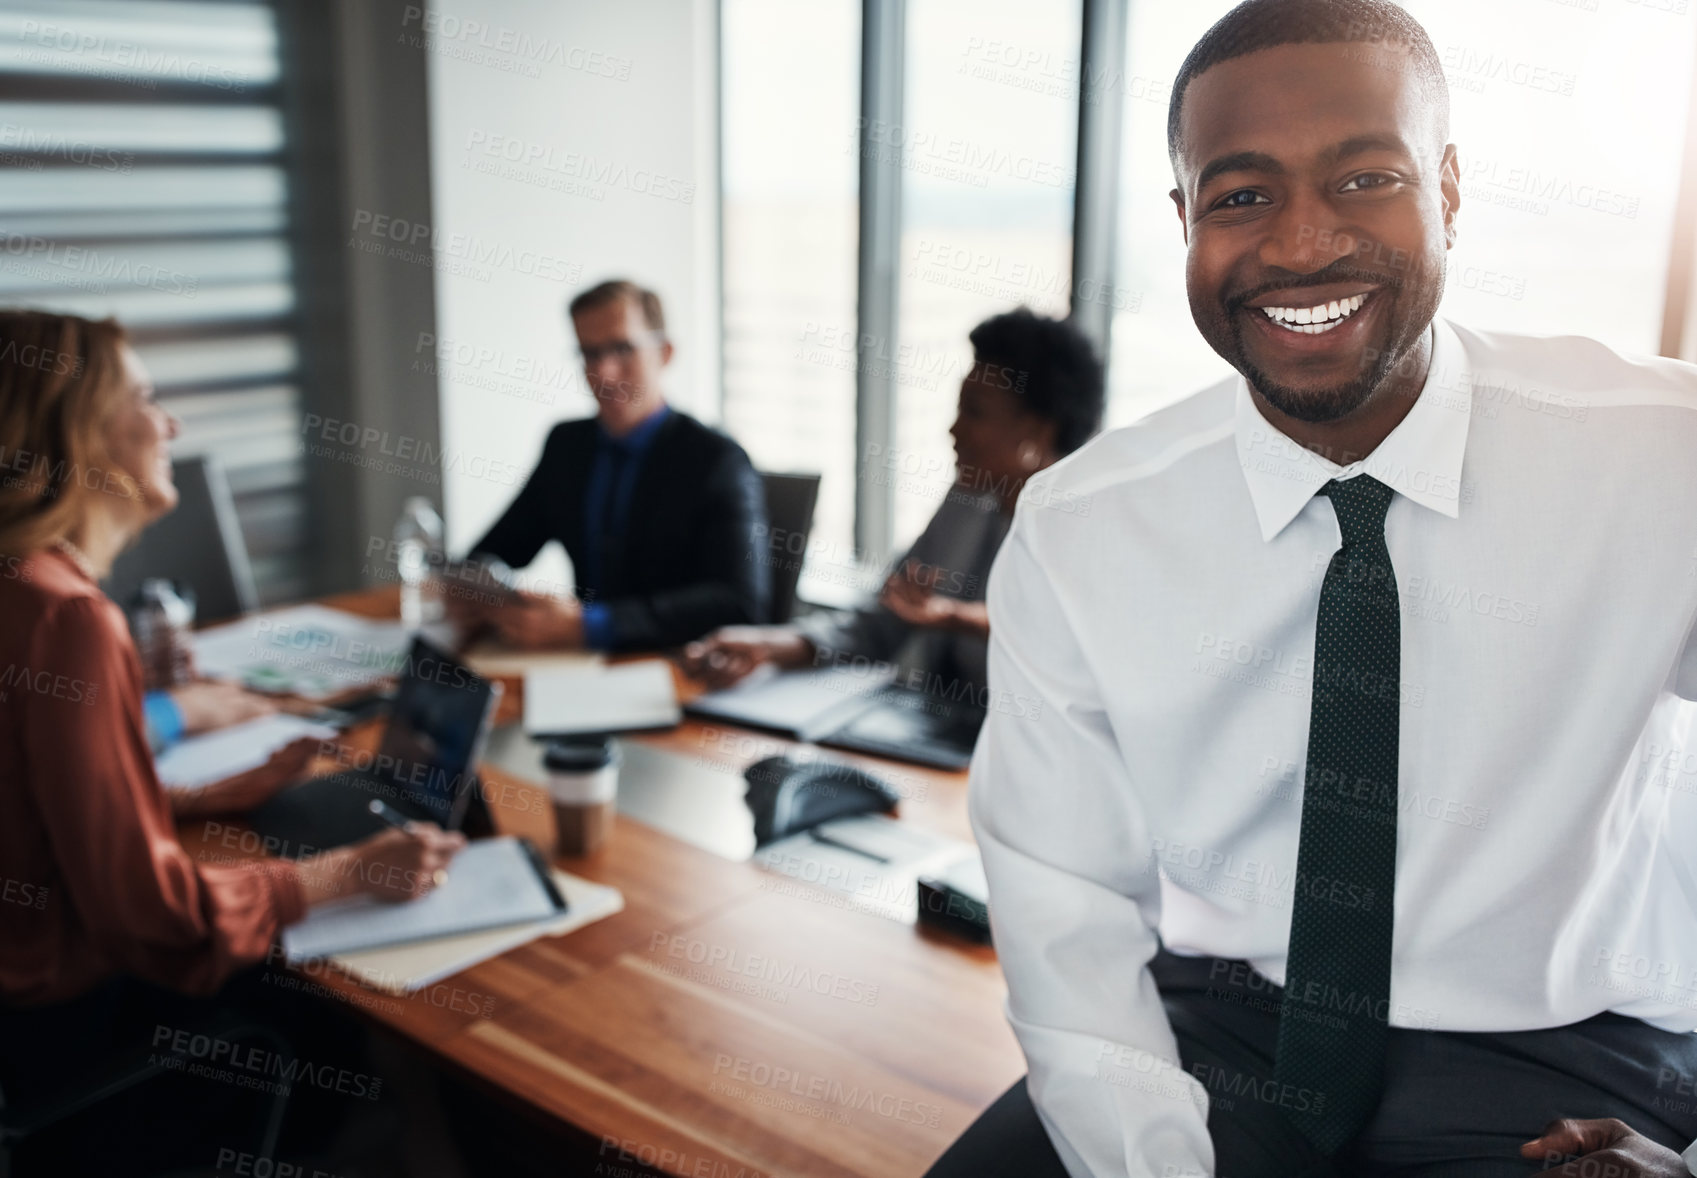 Buy stock photo Portrait of a confident businessman sitting in an office with his colleagues in the background